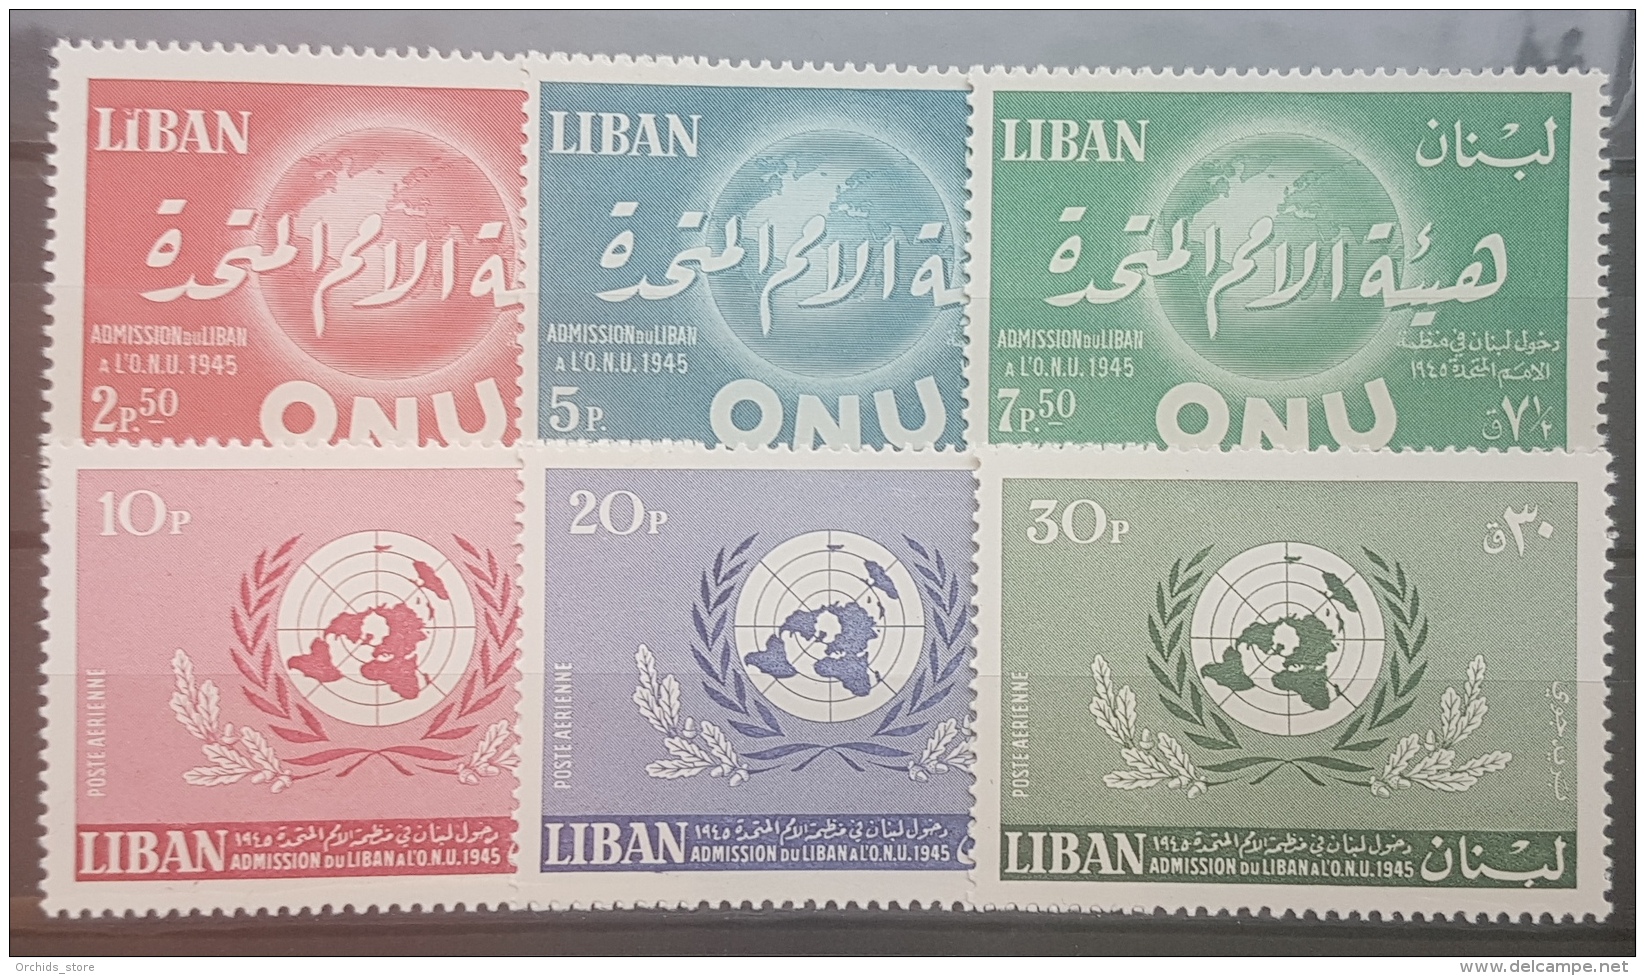 E1124Grp - Lebanon 1967 SG 986-991 Complete Set 6v. MNH - 22nd Anniv Of Admission To The United Nations UNO - Líbano